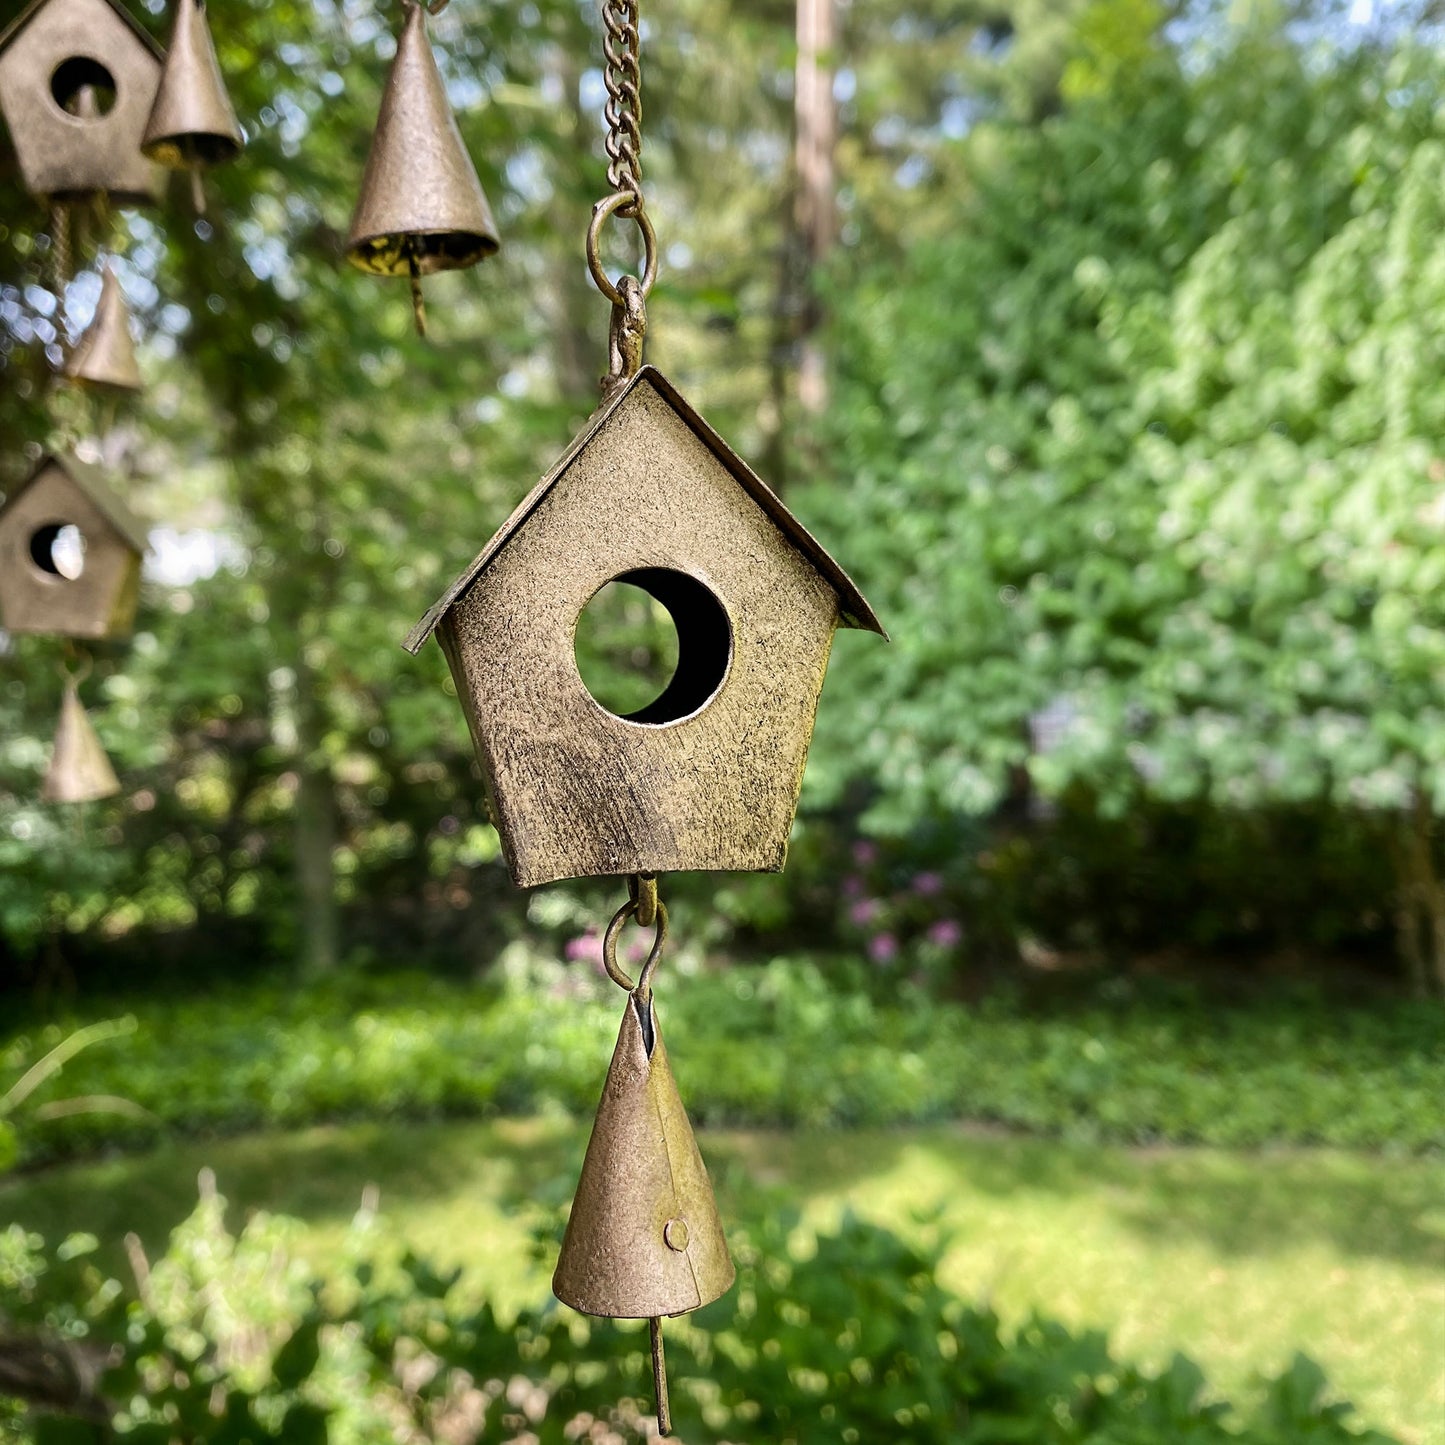 handcrafted-bird-chime-recycled-iron-and-glass-beads